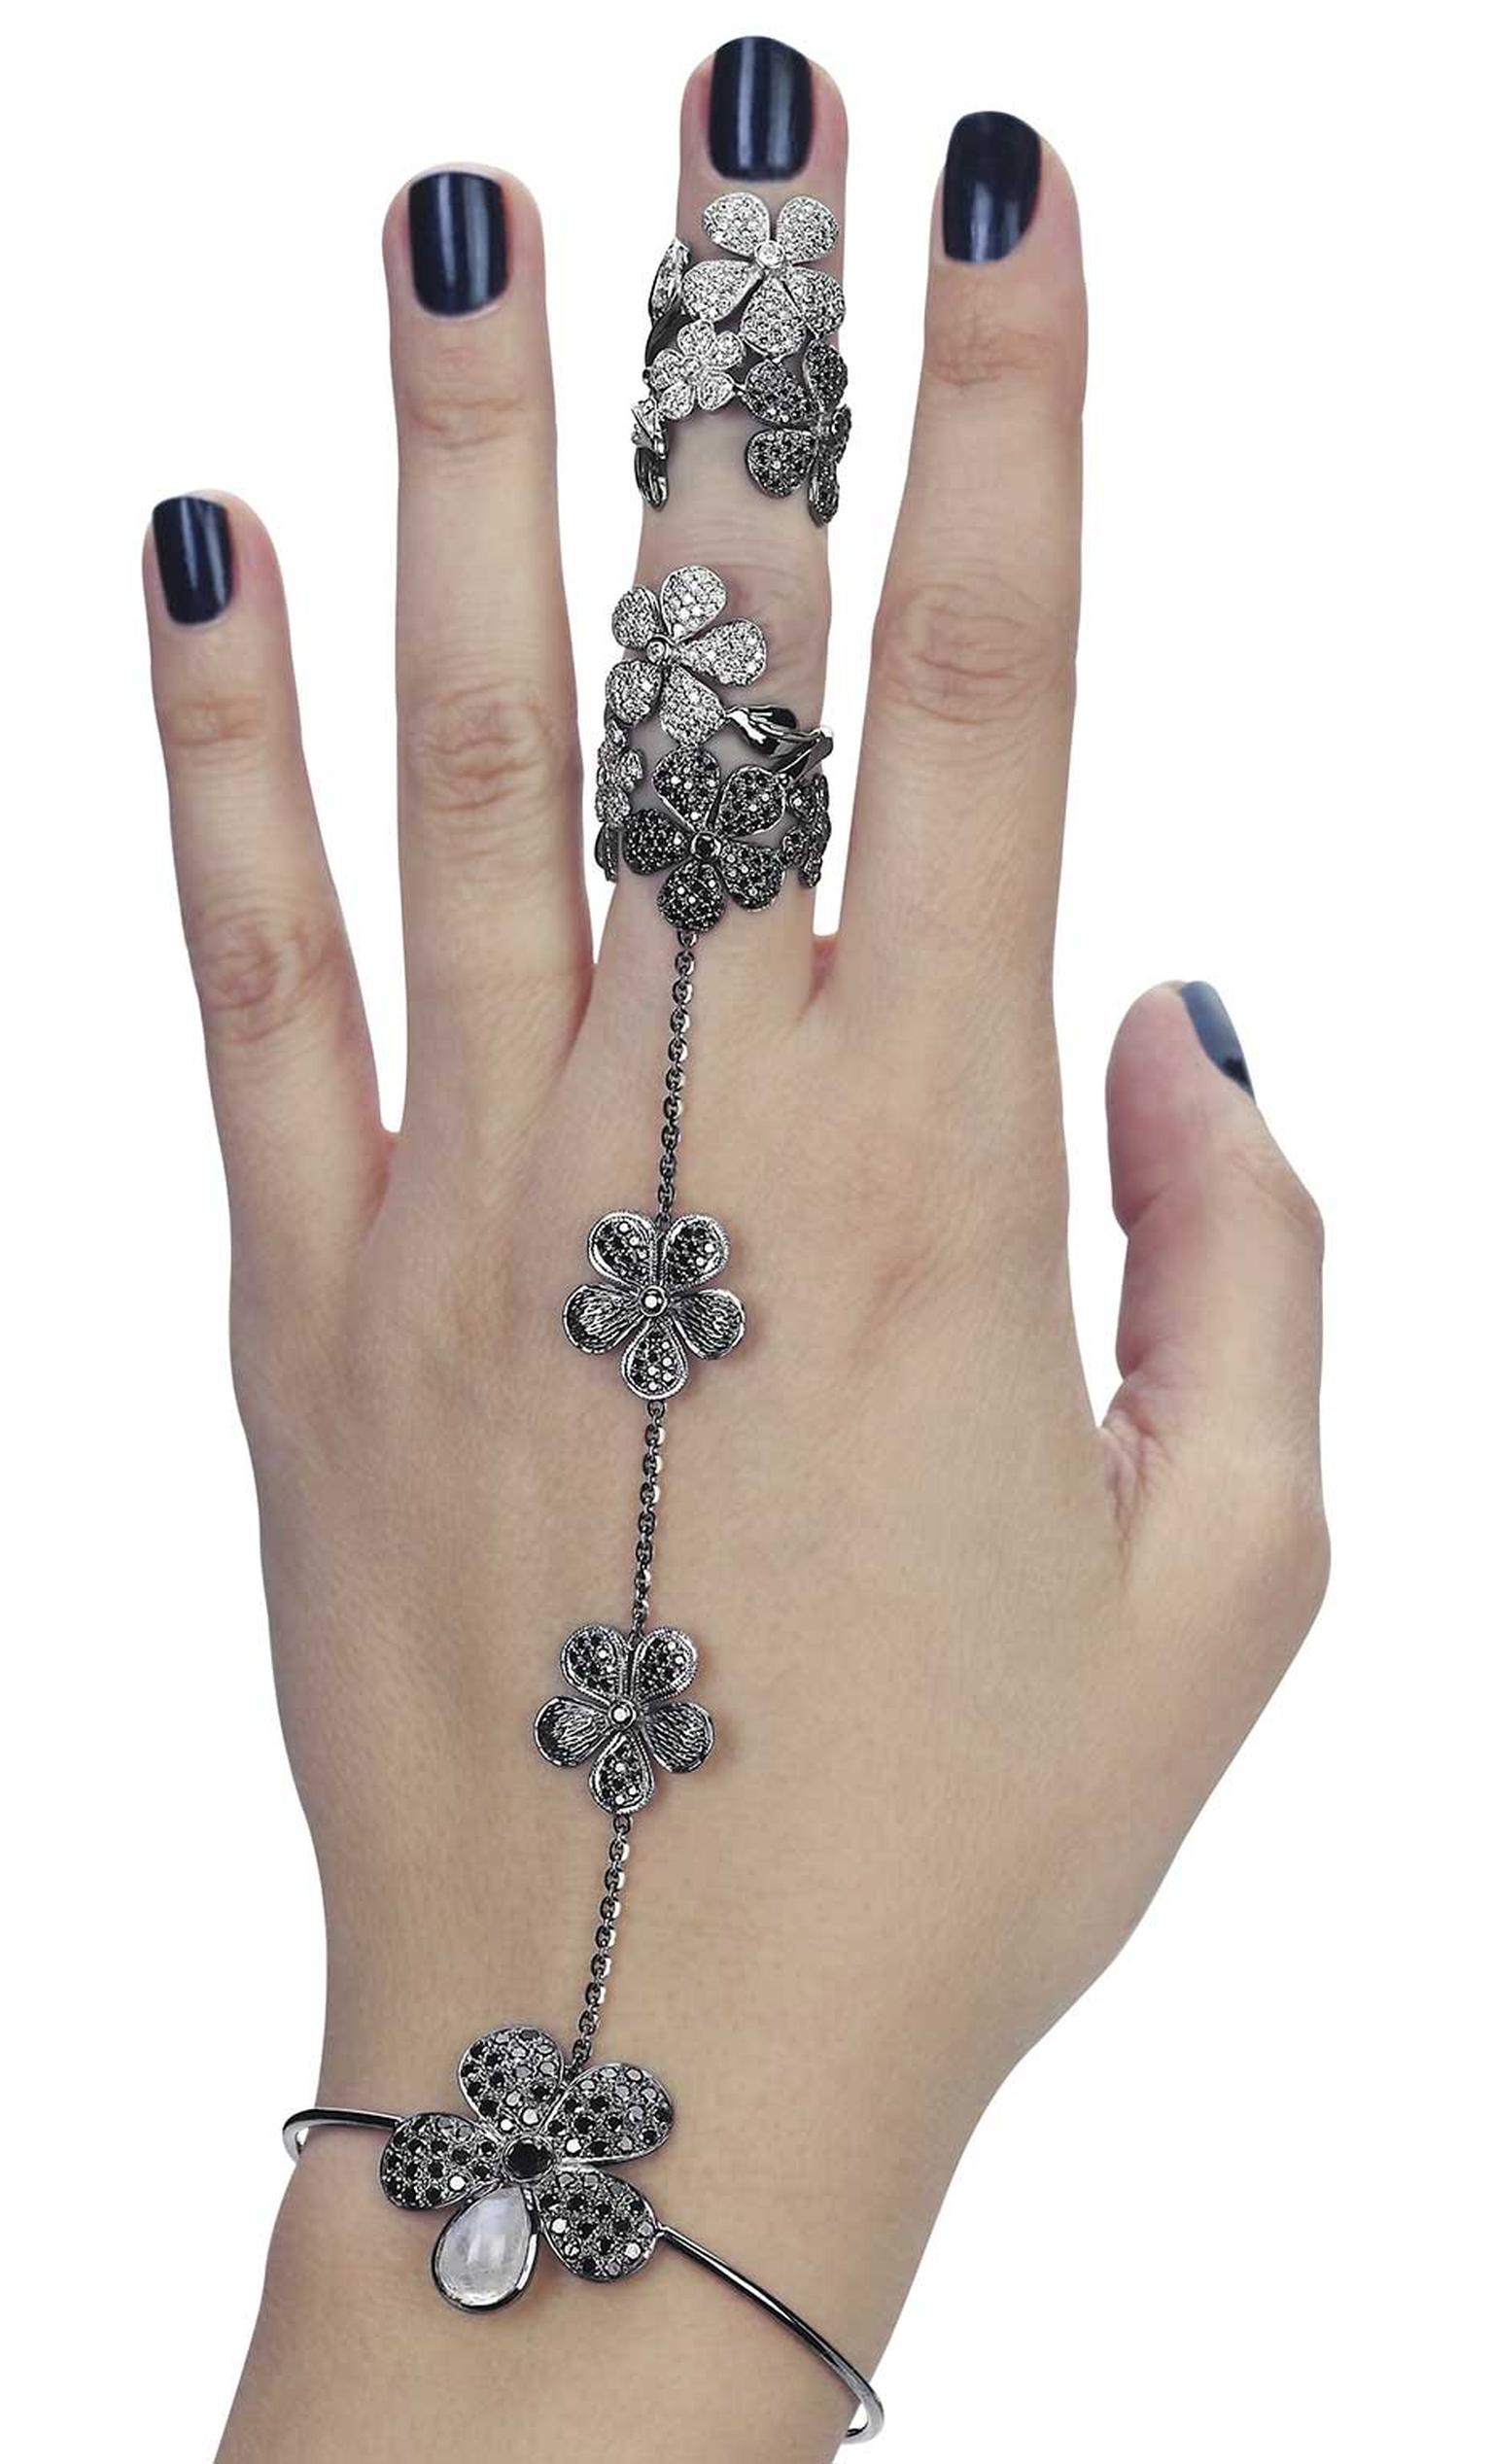 Colette's flower hand jewel wraps around the wrist and middle finger in a fashionable mix of black and white diamonds. See it at the Couture Show Las Vegas